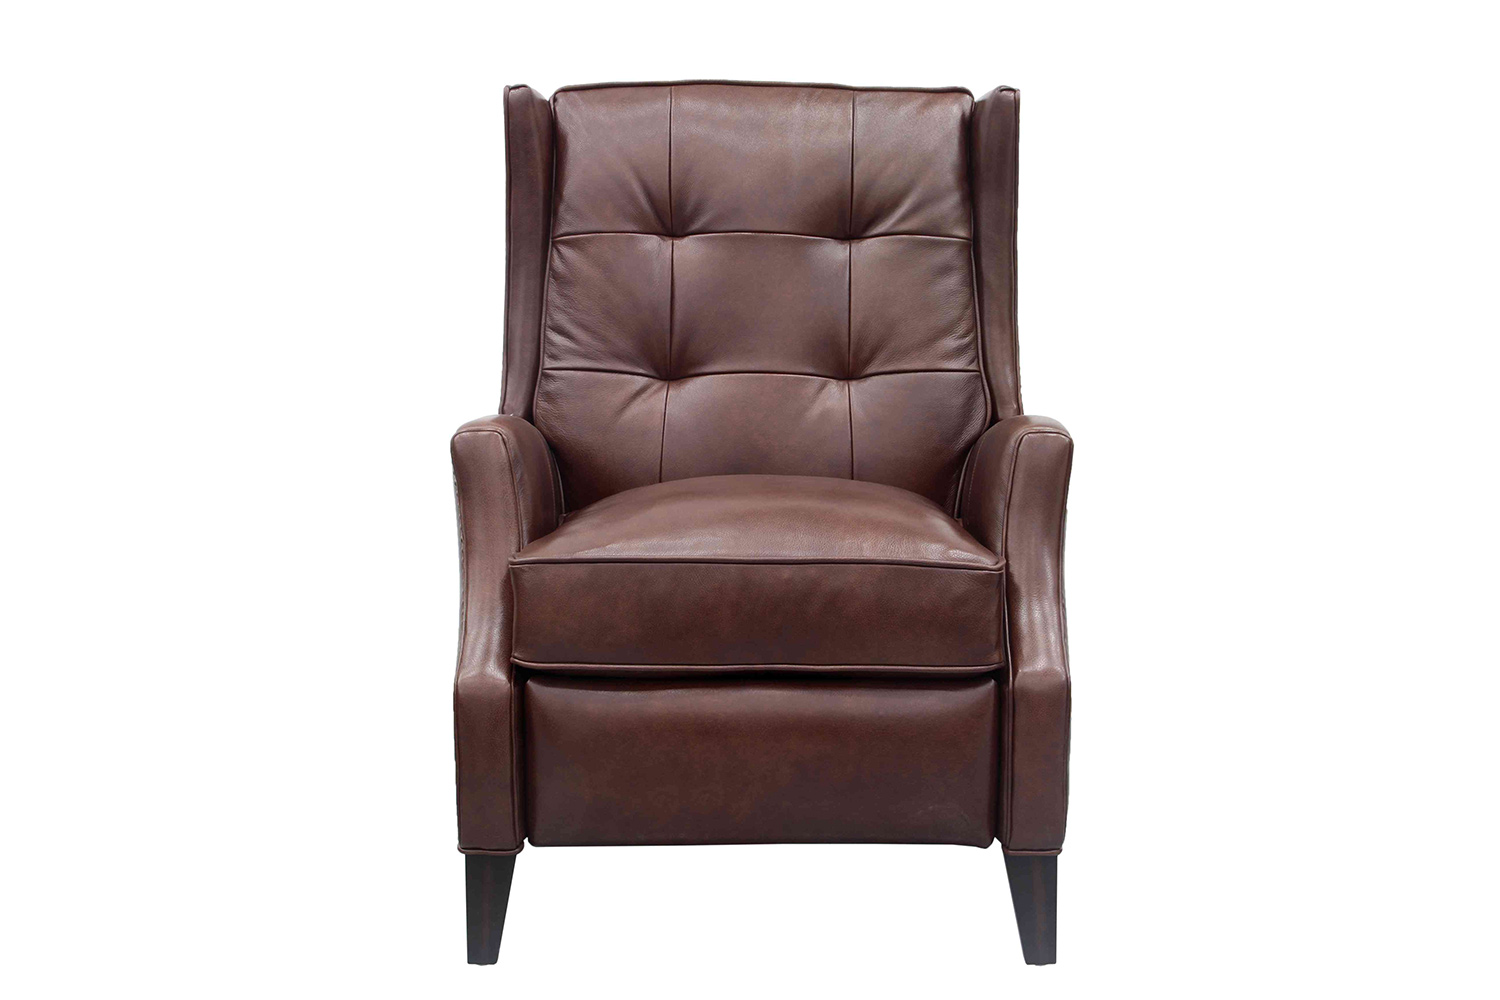 Barcalounger Lincoln Recliner Chair - Shoreham Chocolate/All Leather